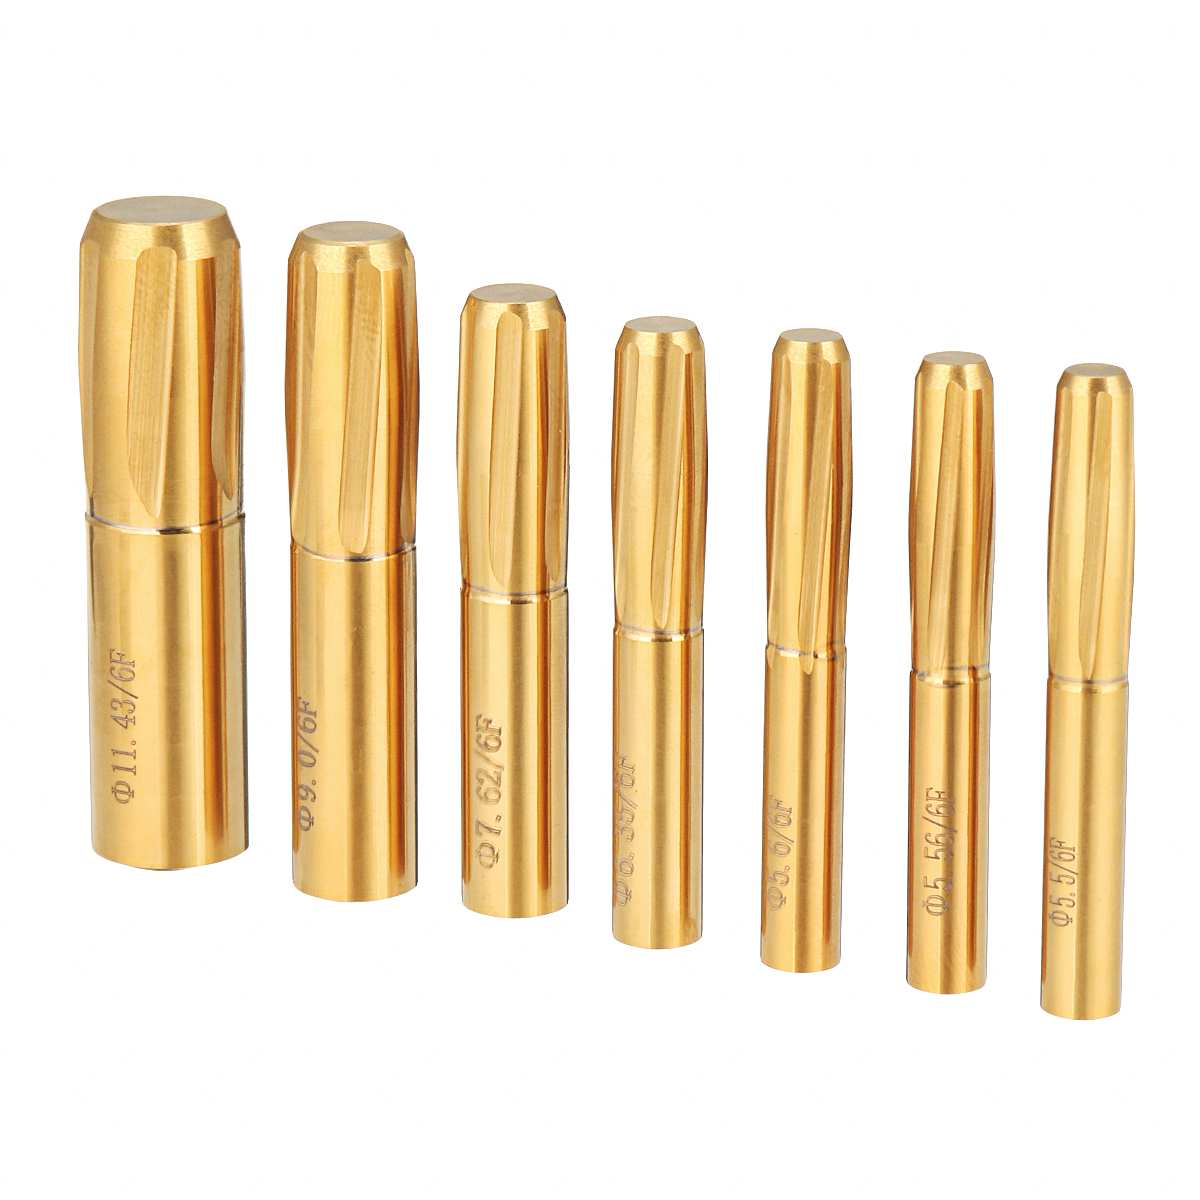 Spiral Reamer 6 Flutes 5.5-11.43mm Rifling Button 5.5mm 5.56mm 5.6mm 7.62mm 11.43mm Chamber Helical Machine Tools Reamer